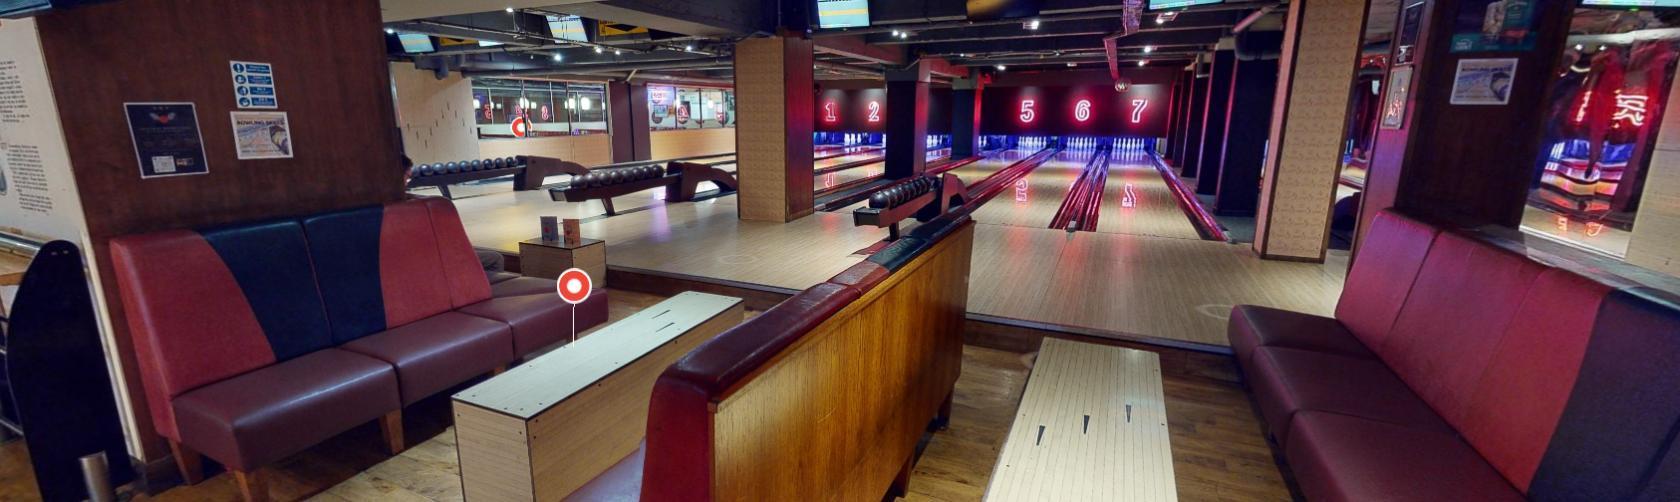 Exclusive Hire Of Bloomsbury Bowling Lanes , Bloomsbury Bowling Lanes & The Kingpin Suite photo #2